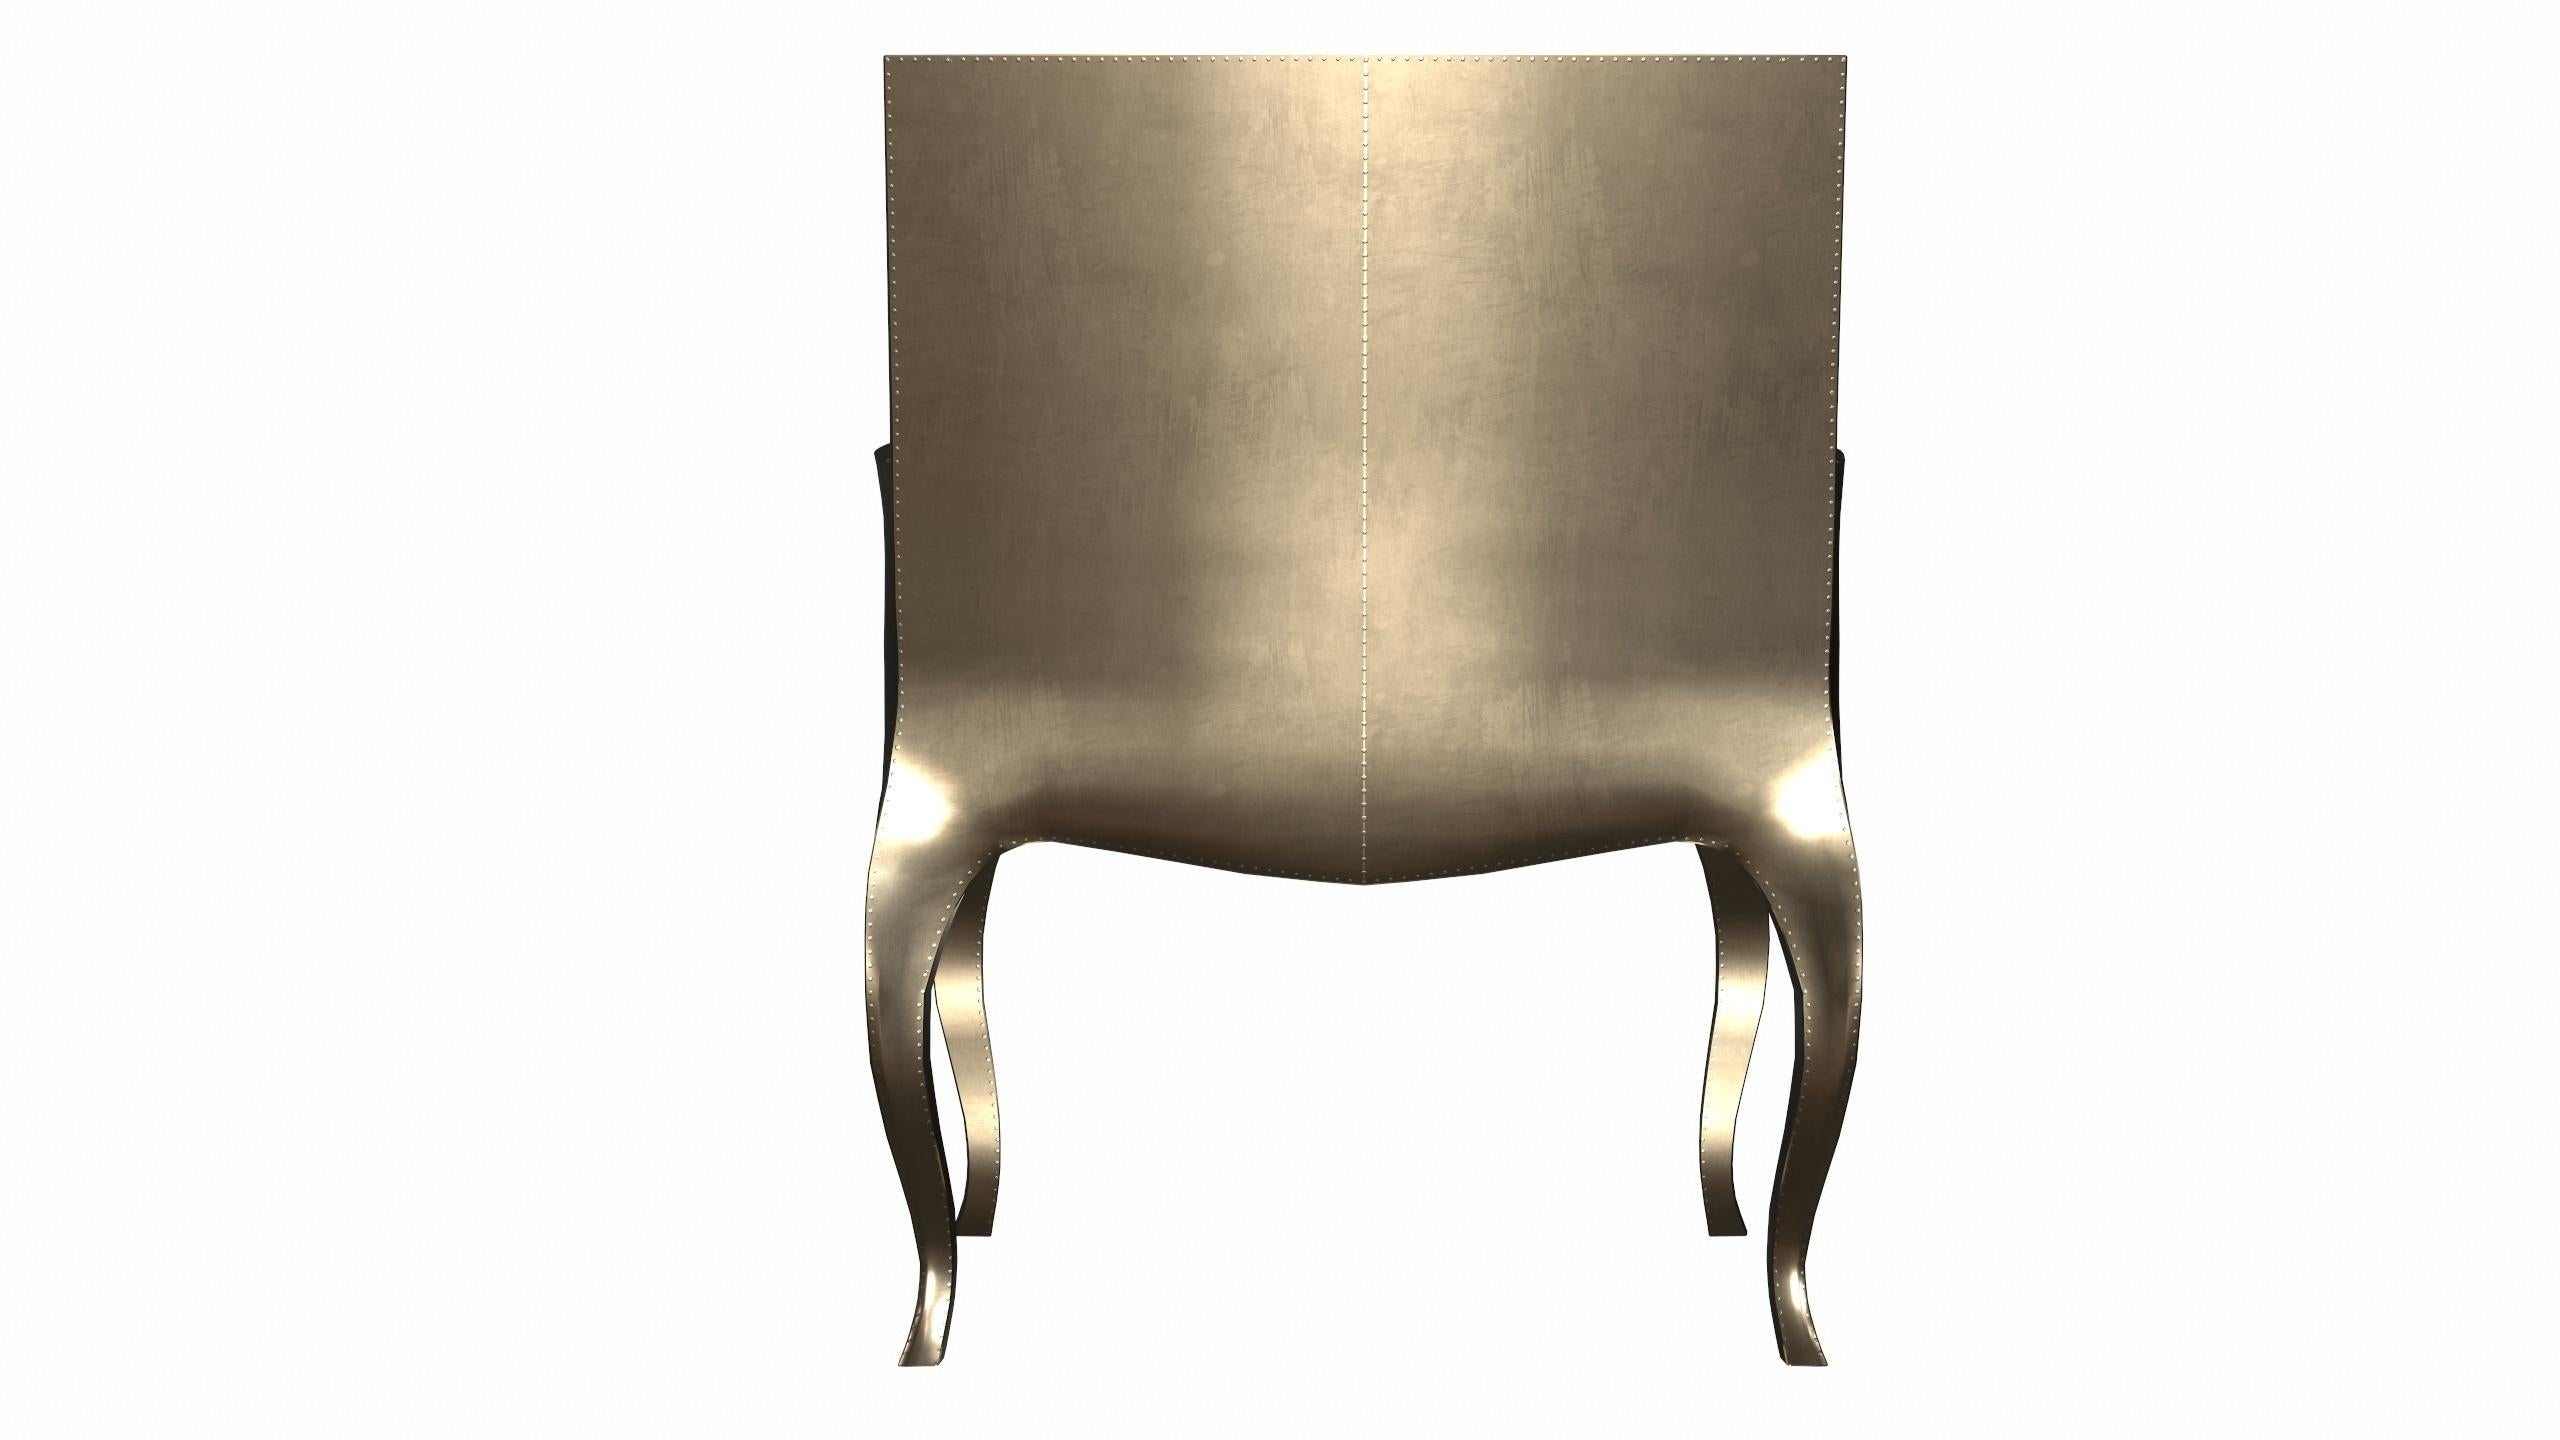 Art Deco Chairs in Smooth Brass by Paul Mathieu for S. Odegard For Sale 1